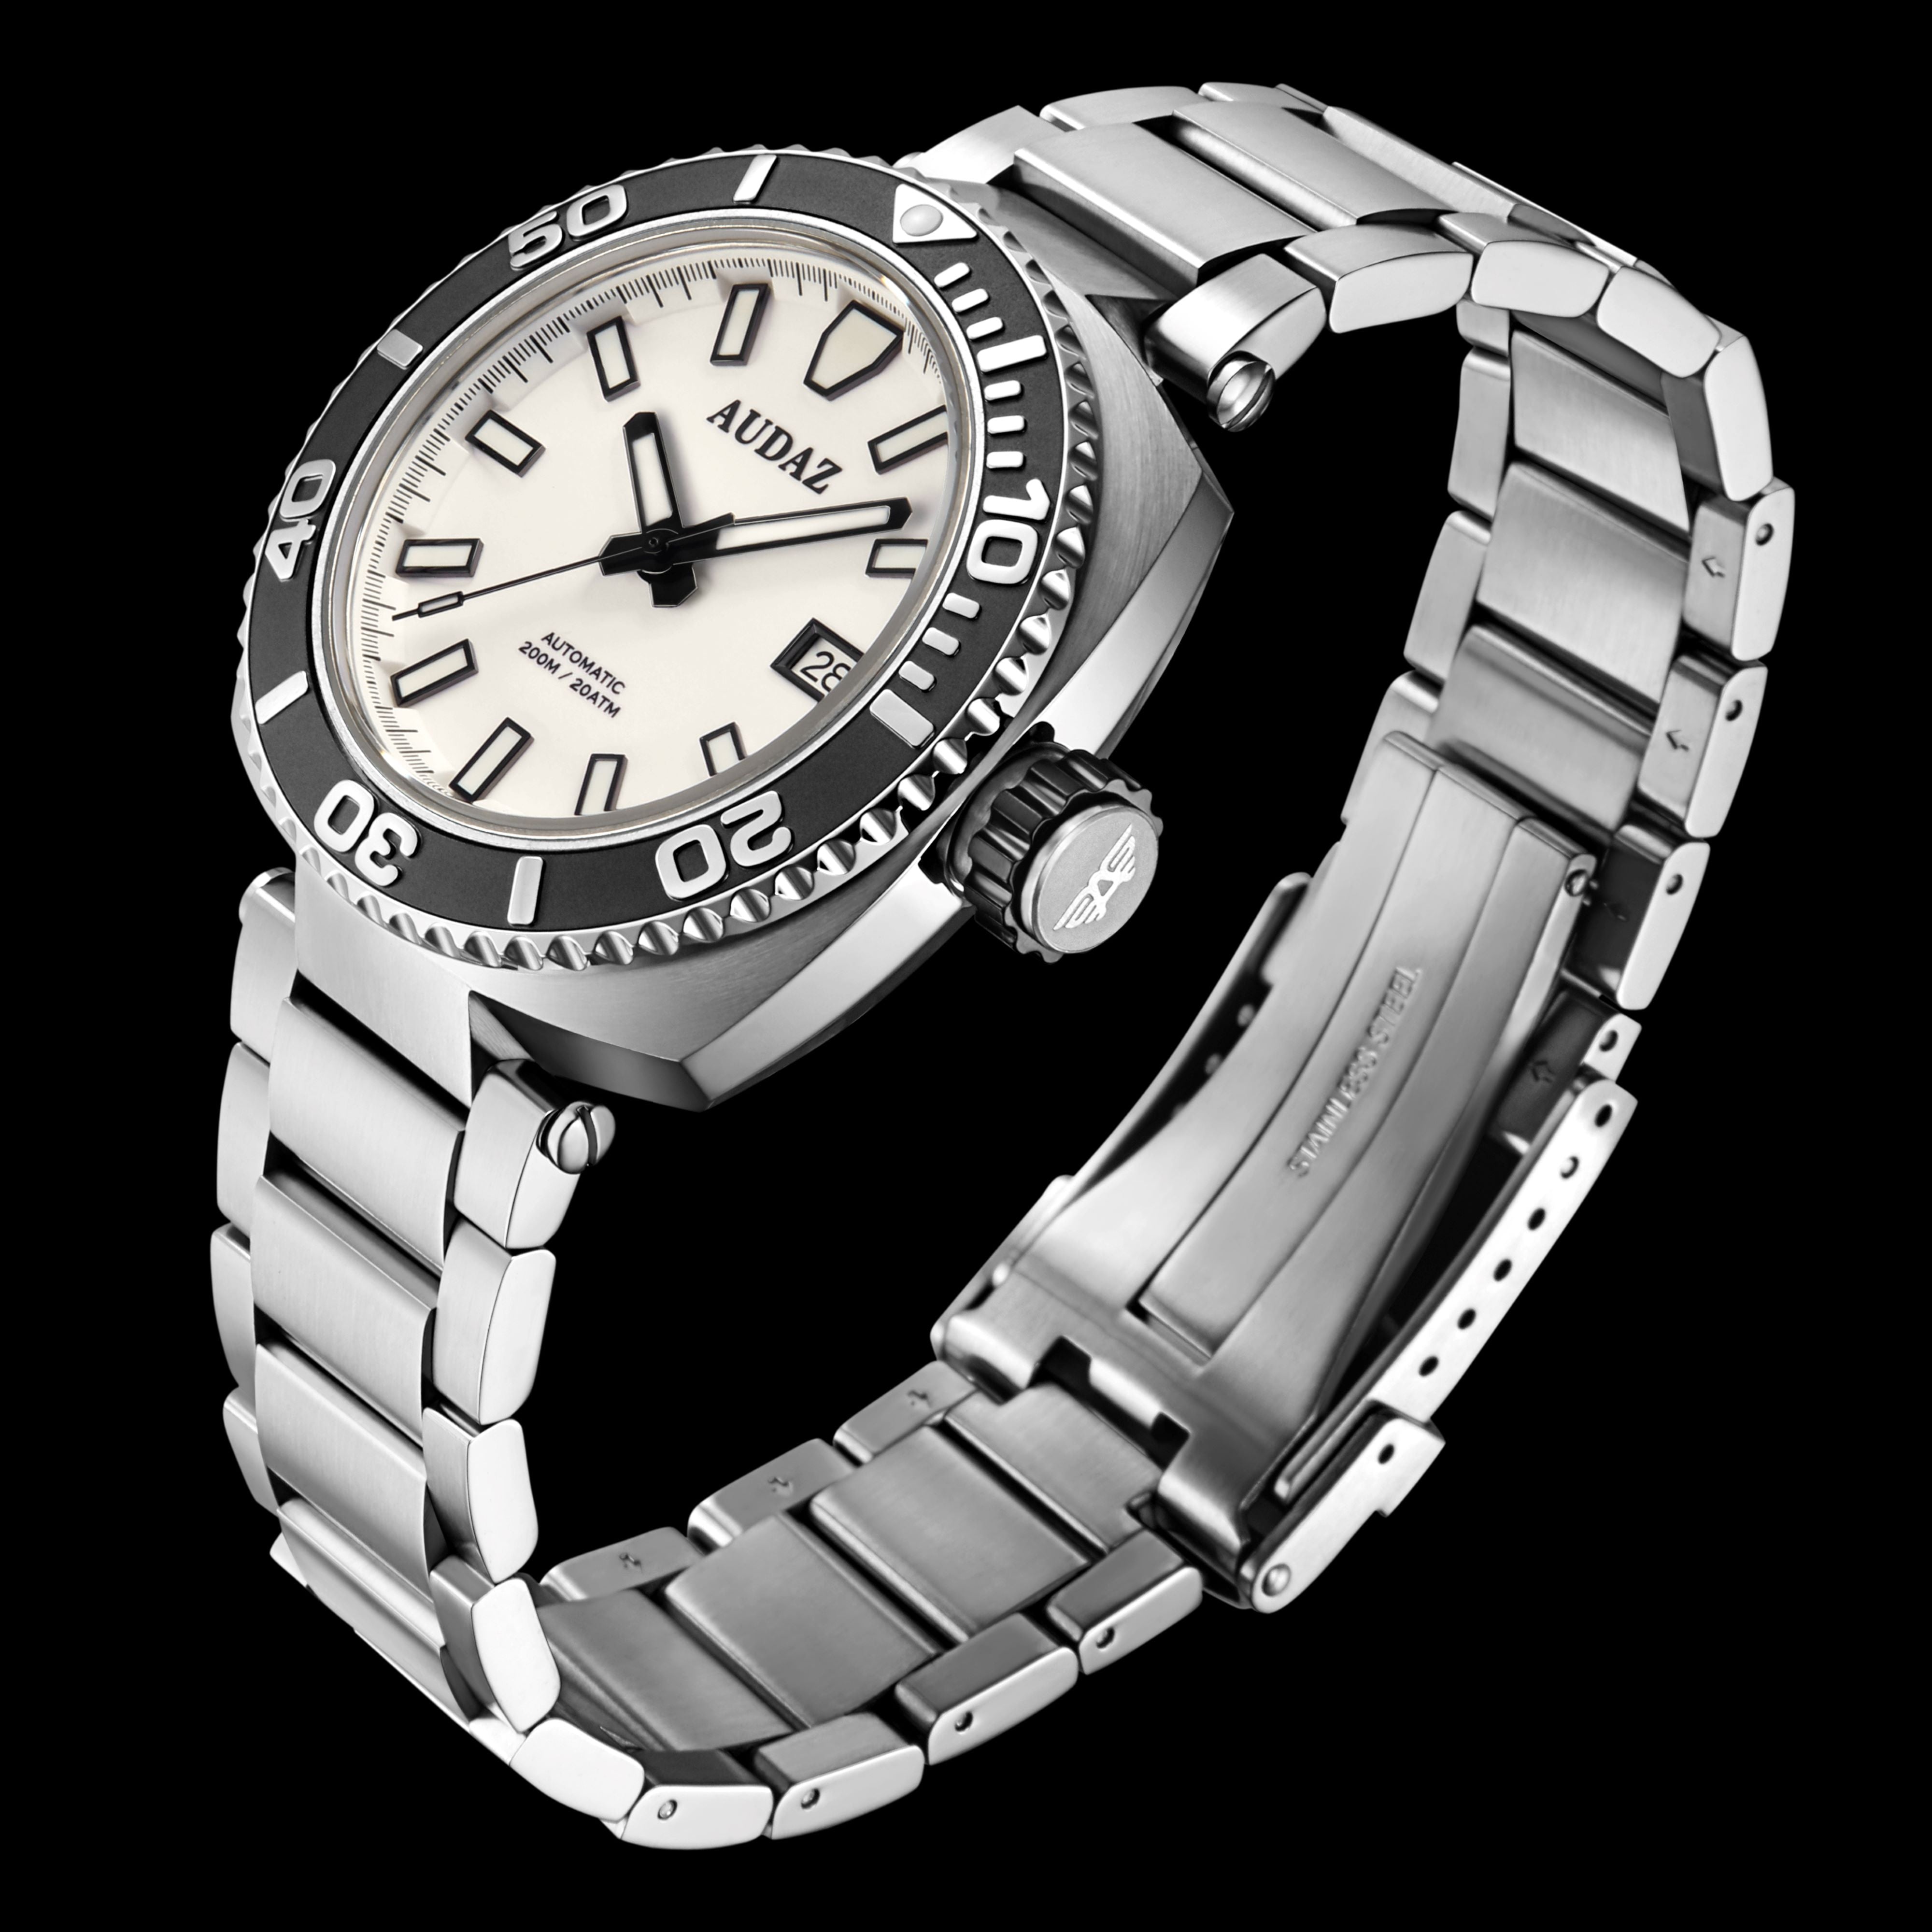 KING RAY I 200m Dive Watch I Automatic I Sapphire Crystal - Audaz Watches